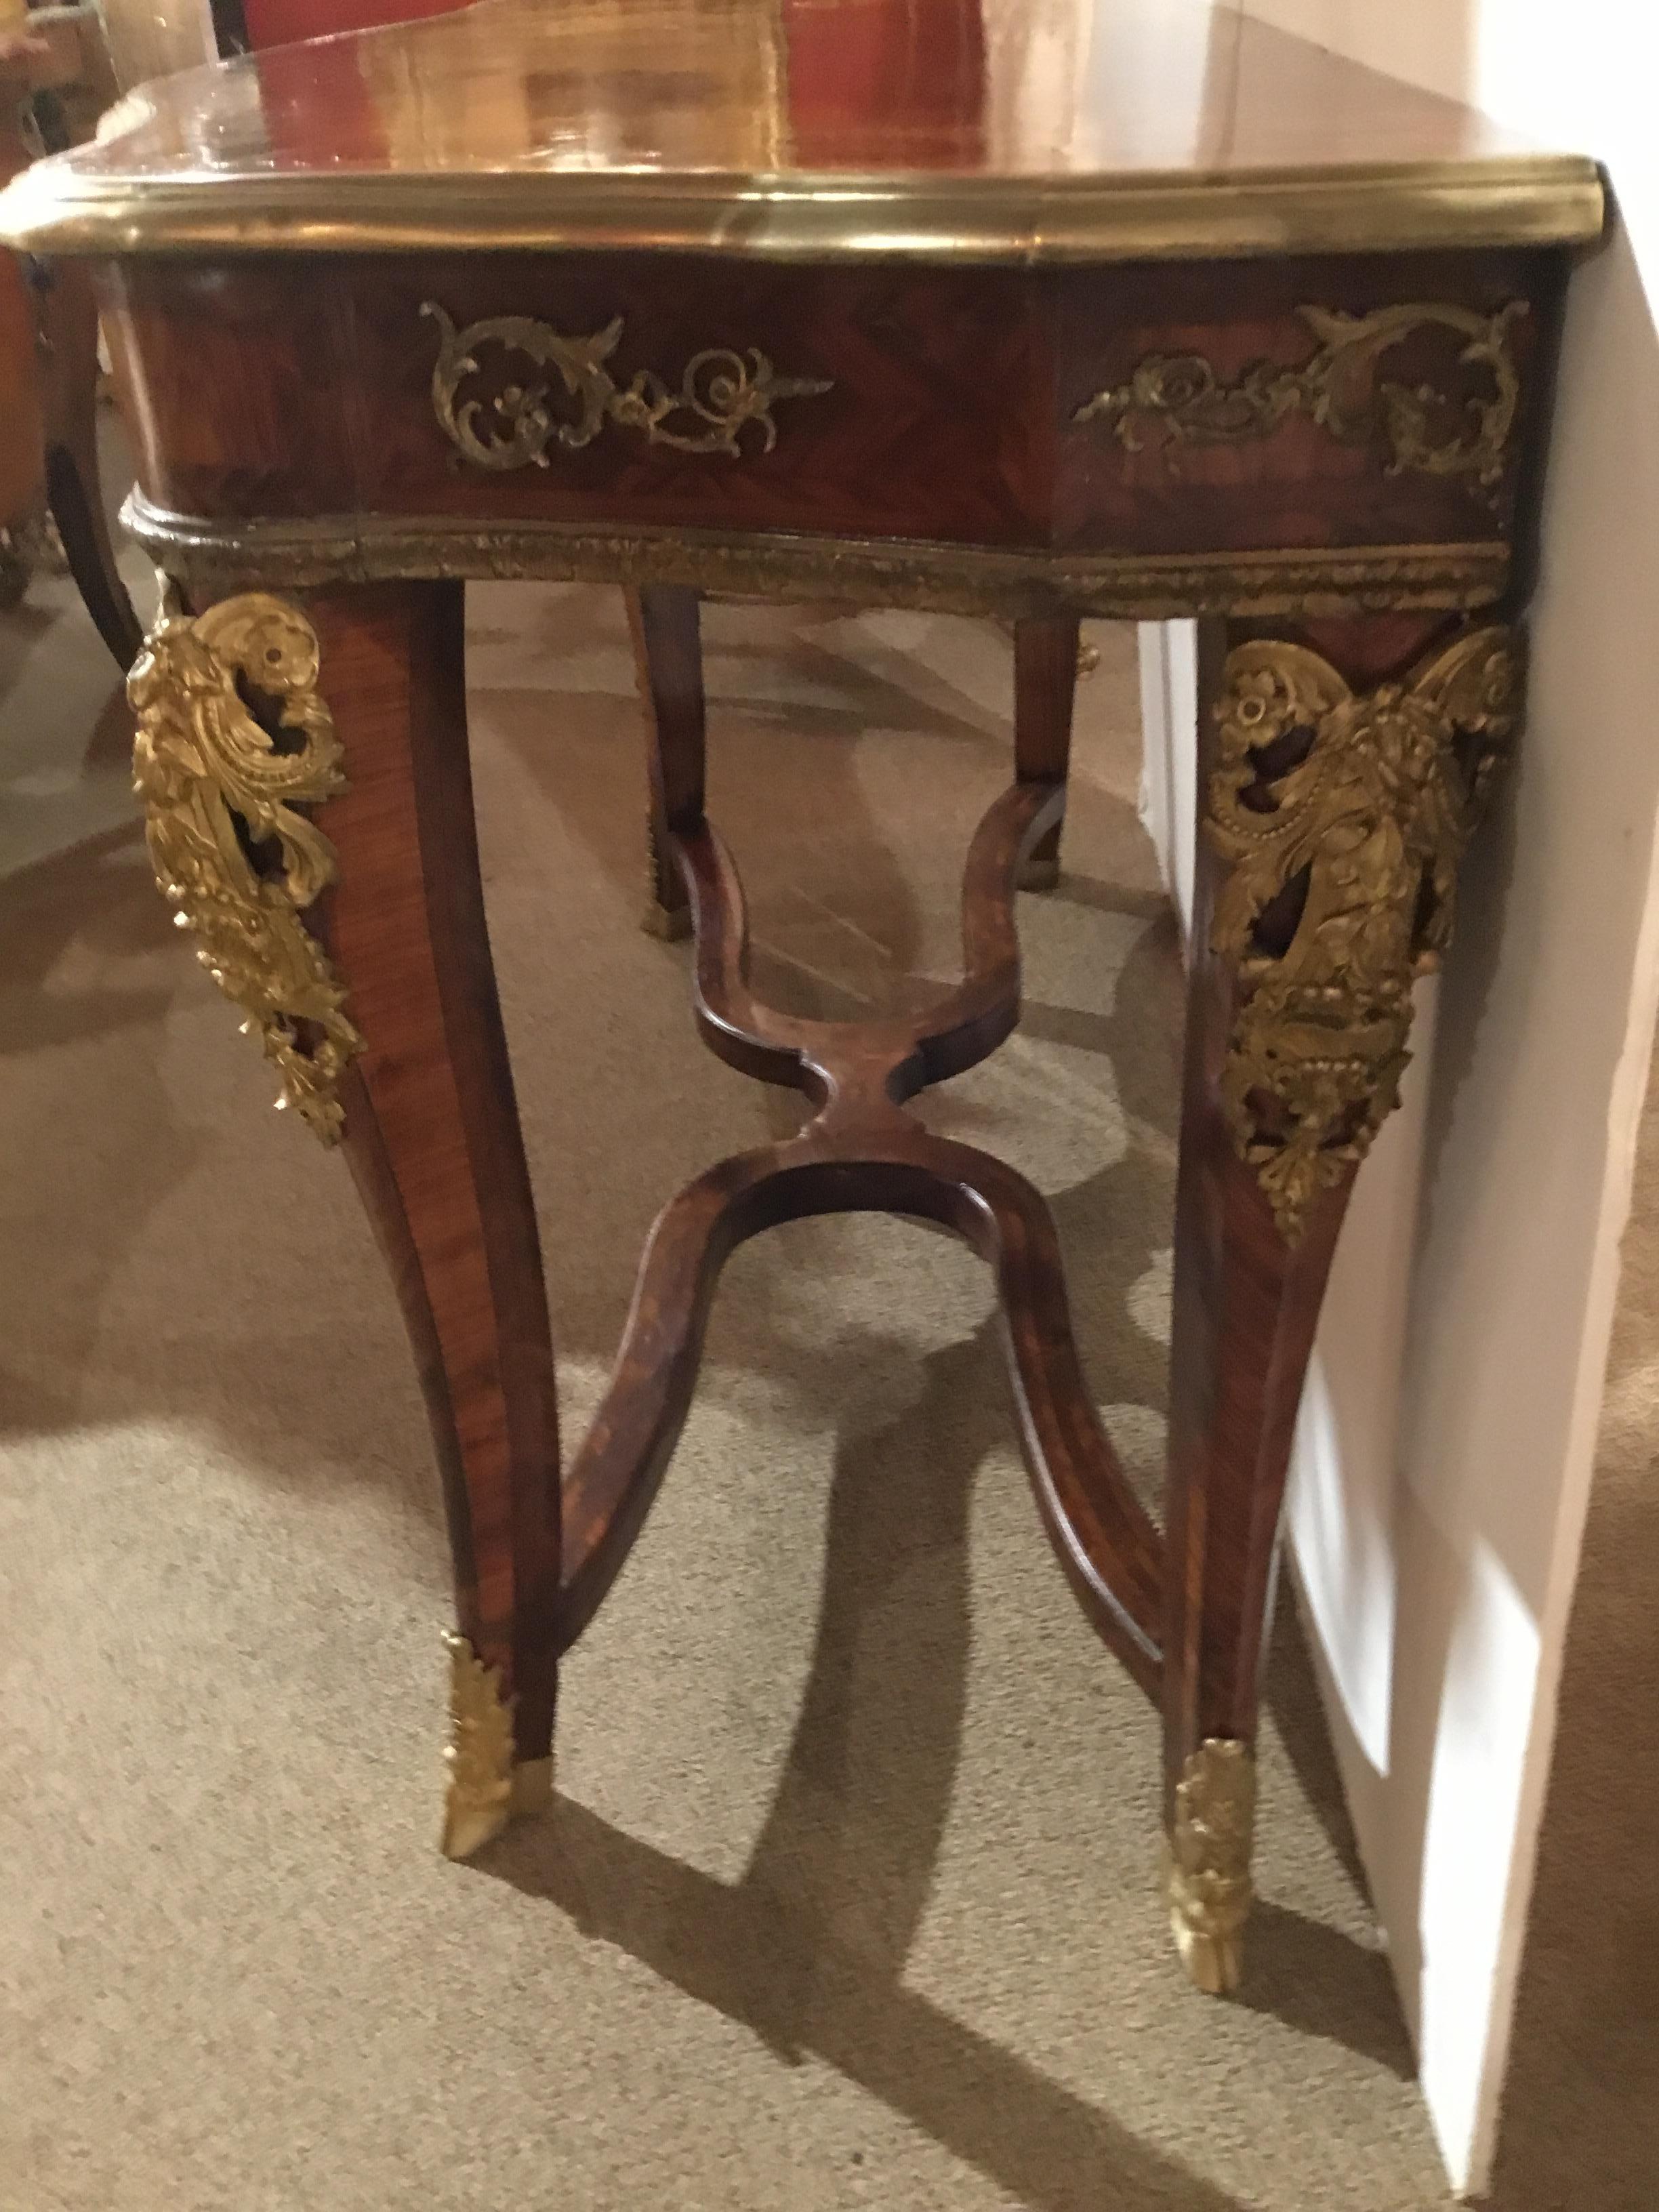 Regency Regence Gilt Bronze Mounted Parquetry Inlaid Hardwood Console Table 18th Century For Sale